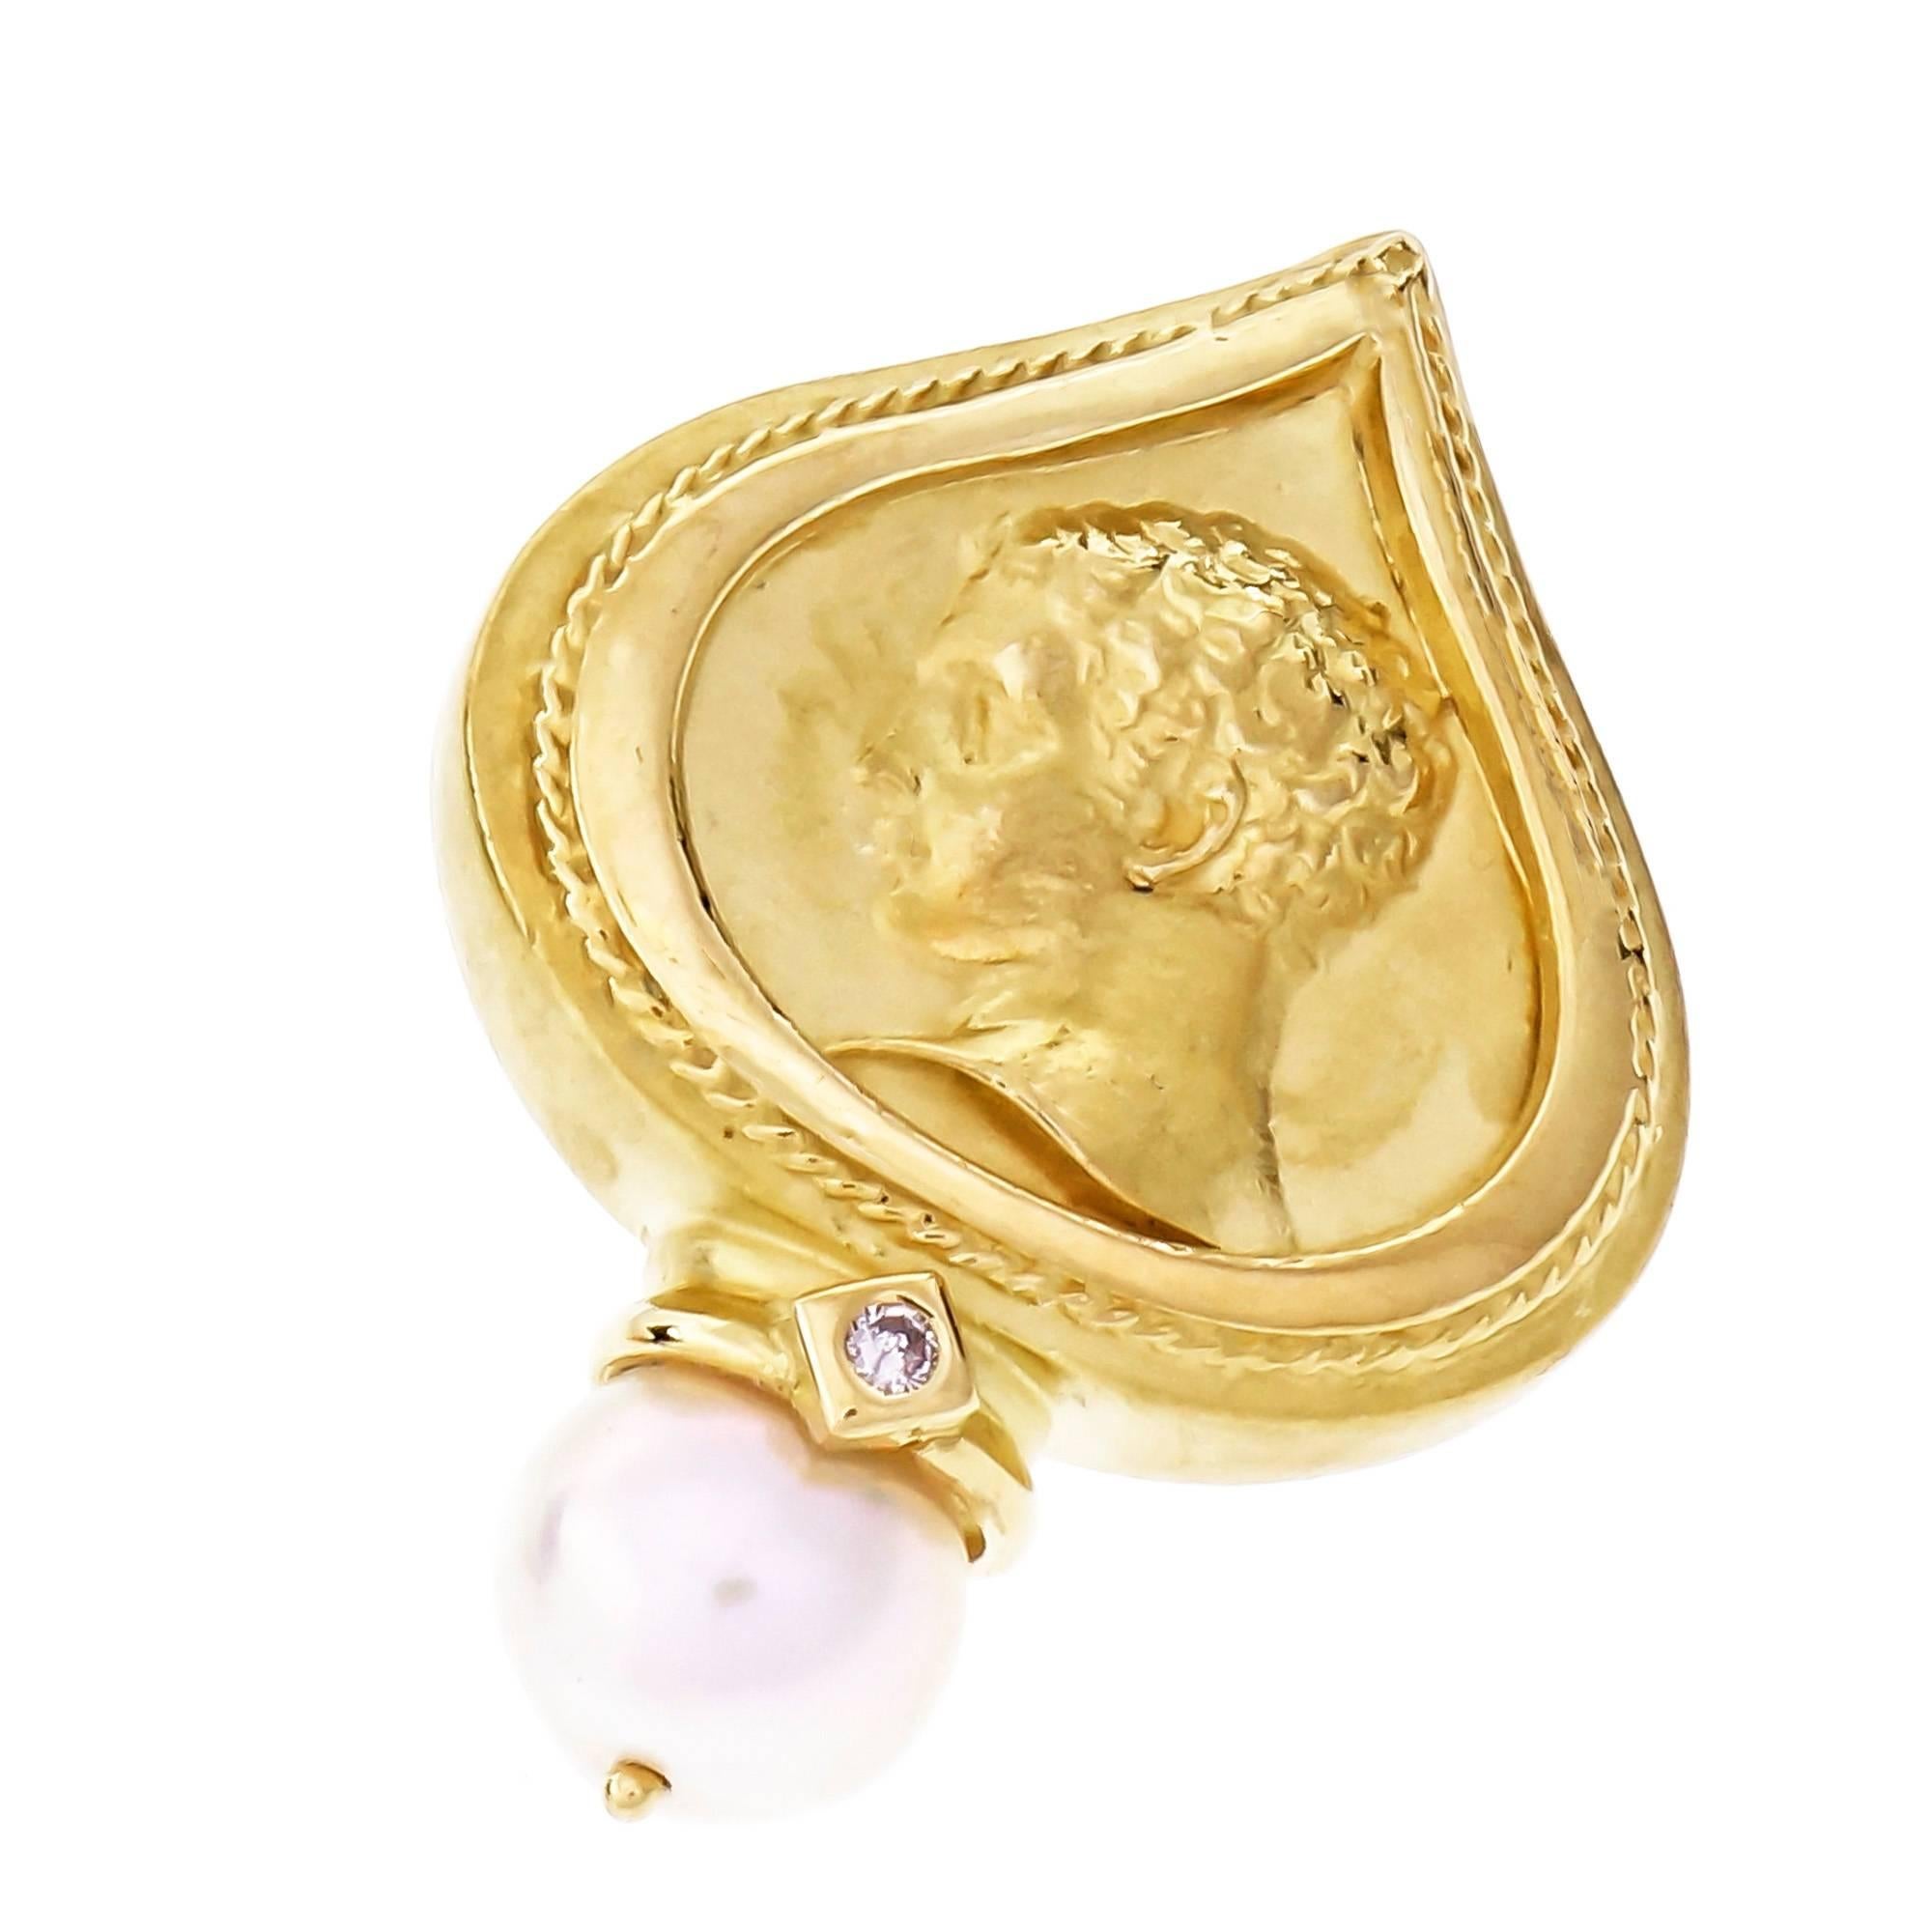 SeidenGang all original 18k yellow gold clip post earrings with bright cultured Pearls and full cut Diamond accents.

2 round Diamonds, approx. total weight .06cts, H, SI1
2 cultured Pearls white with pink overtone, 9.0mm
18k yellow gold
Tested and